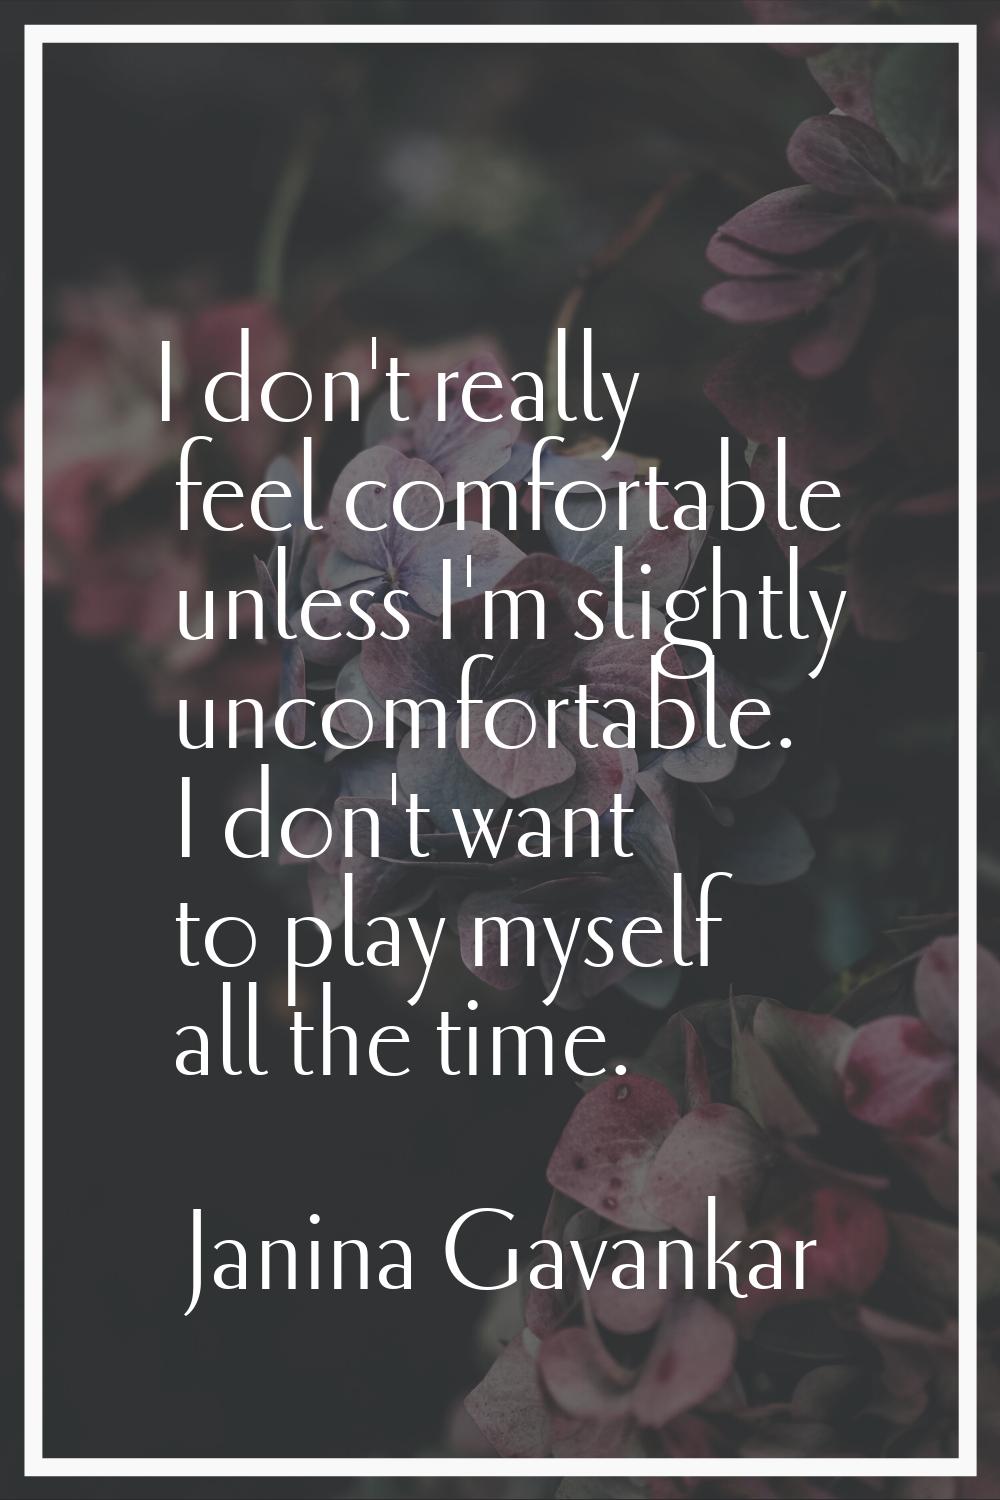 I don't really feel comfortable unless I'm slightly uncomfortable. I don't want to play myself all 